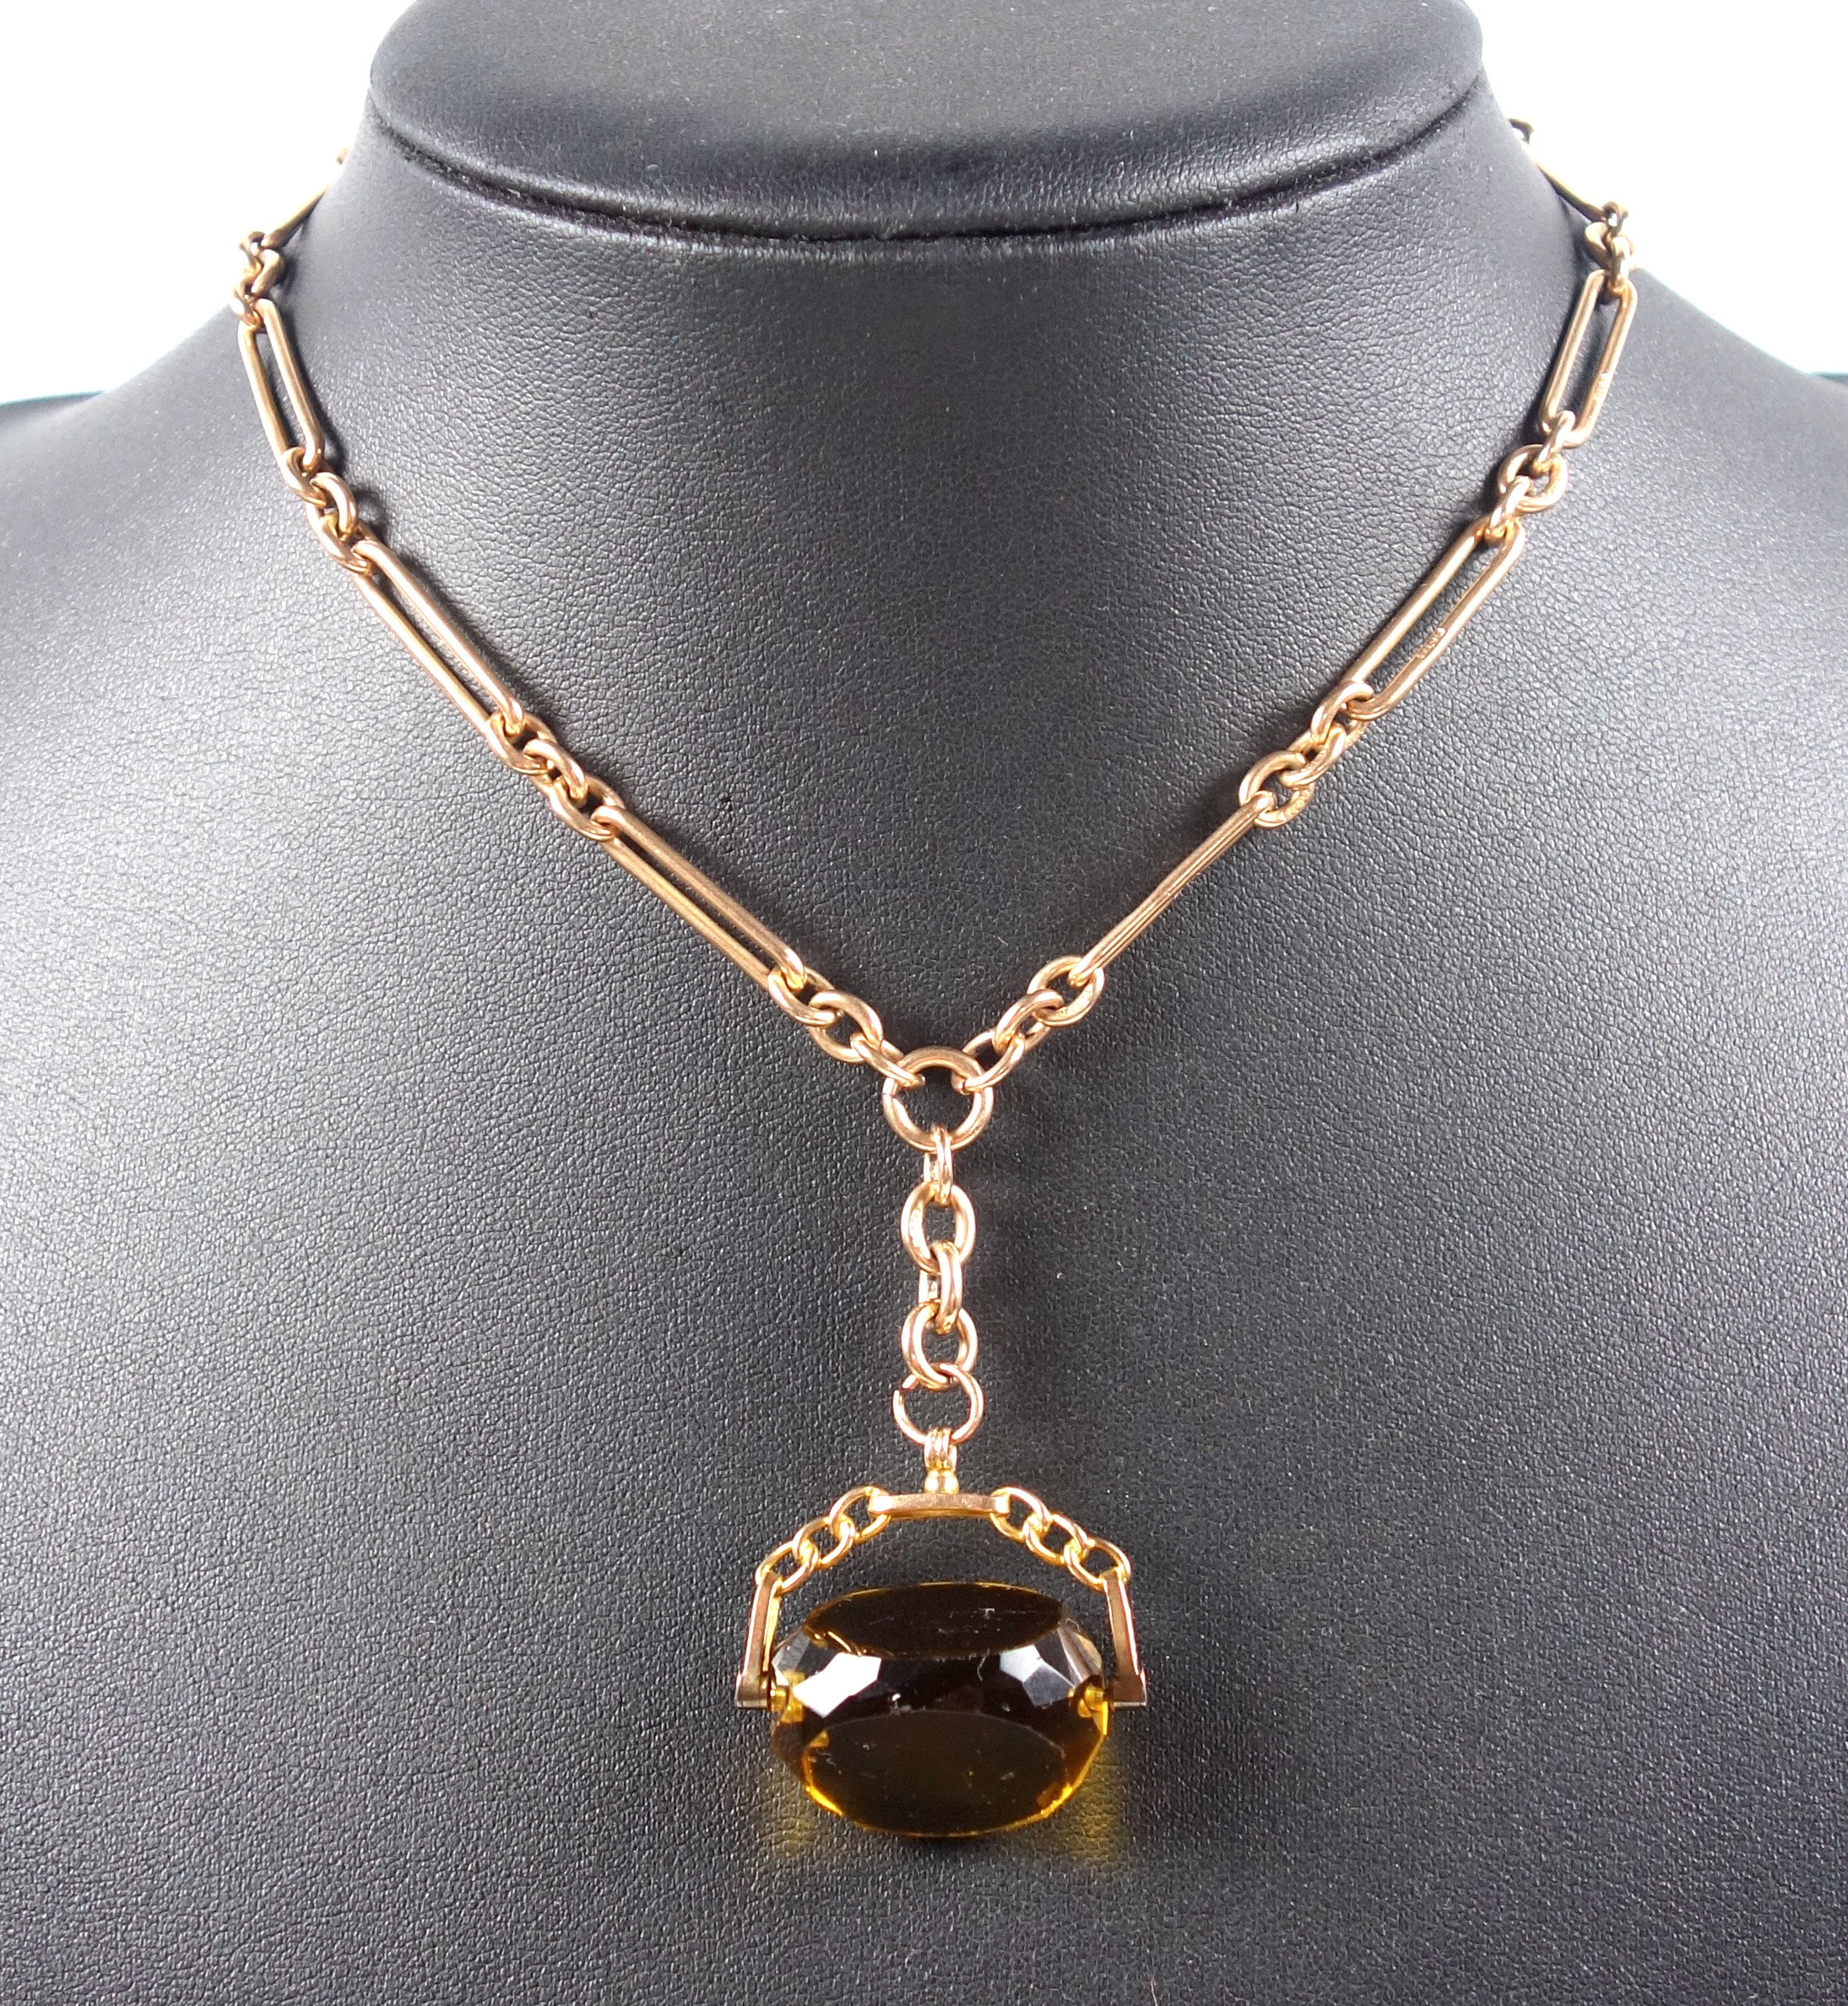 9ct gold Figaro belcher chain with two 'dog collar' clasps together with a 9ct gold citrine fob, - Image 5 of 5